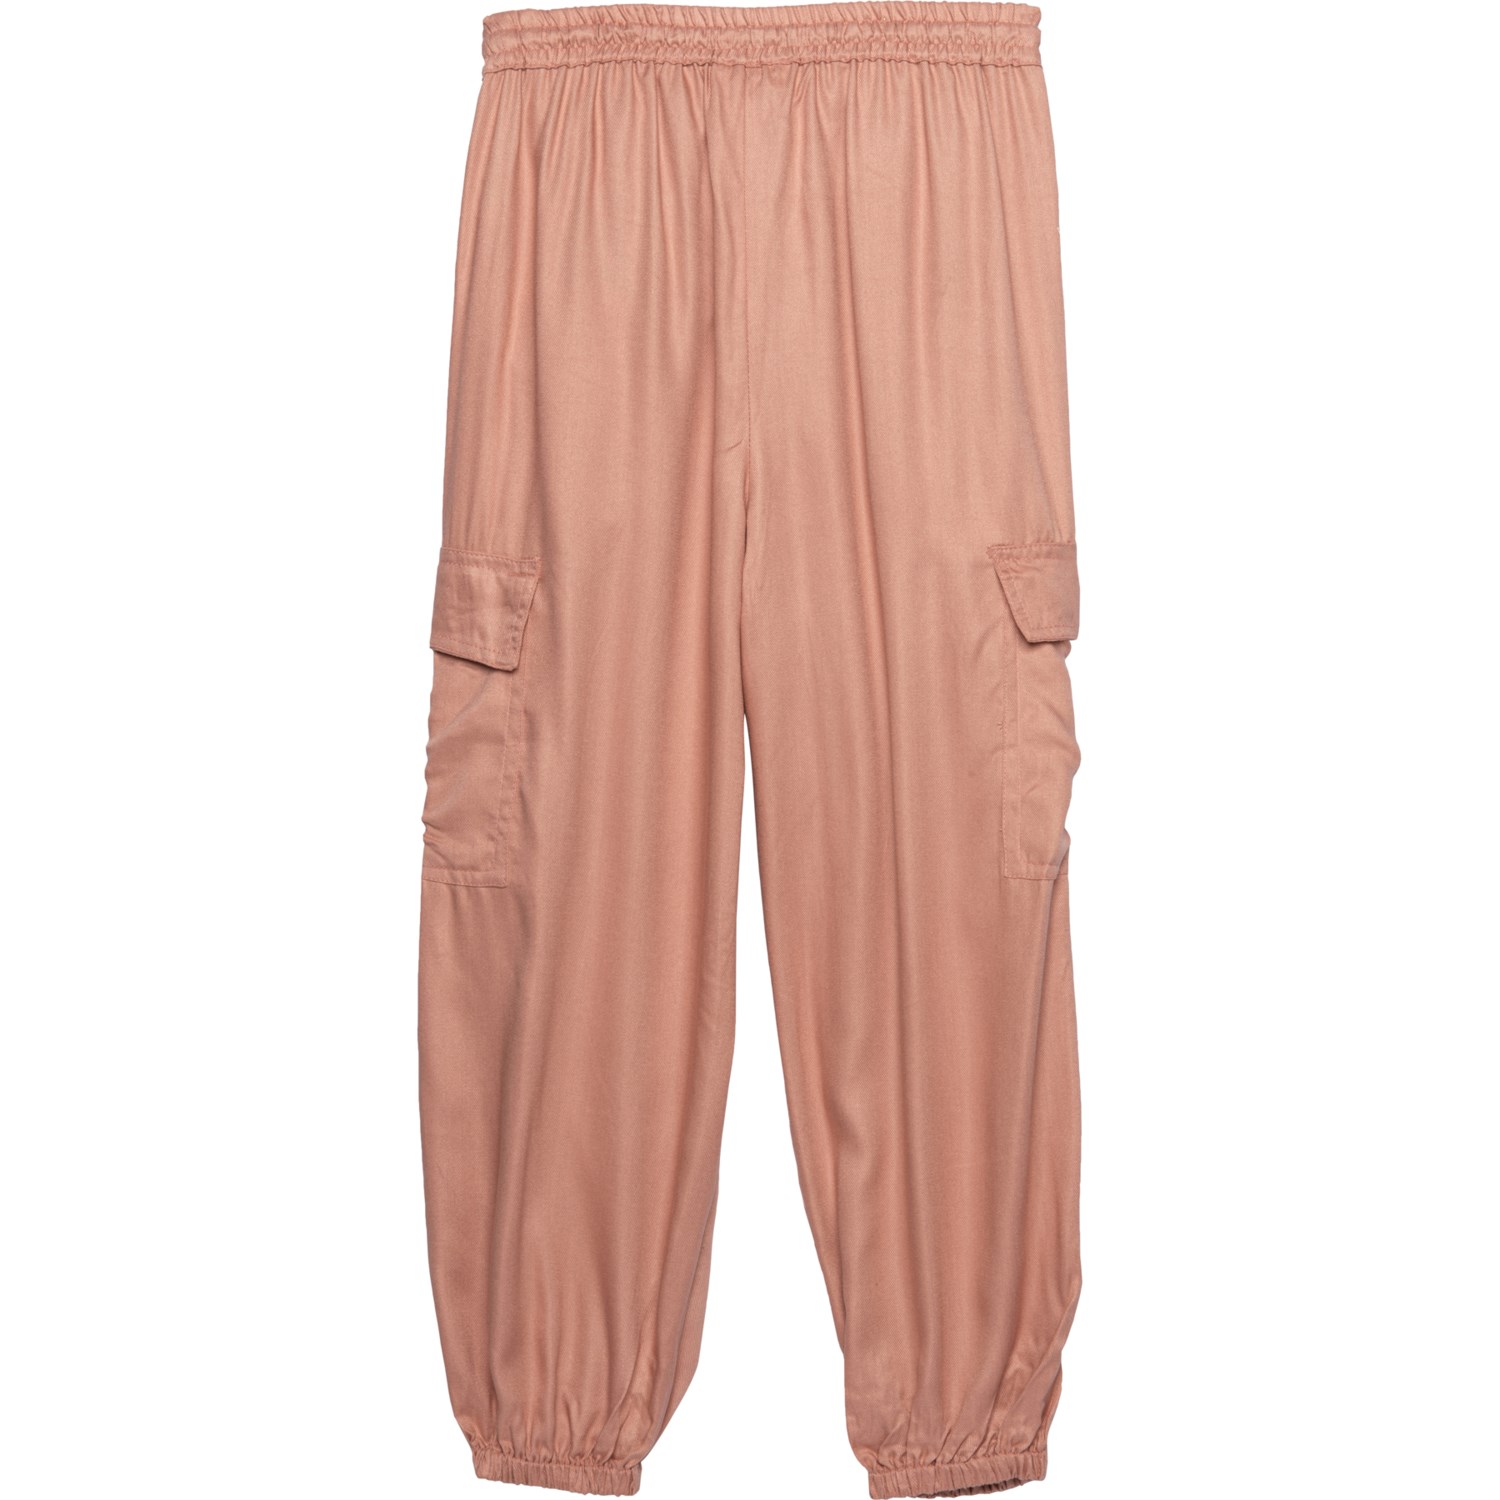 Angie Cargo Pants (For Big Girls) - Save 75%